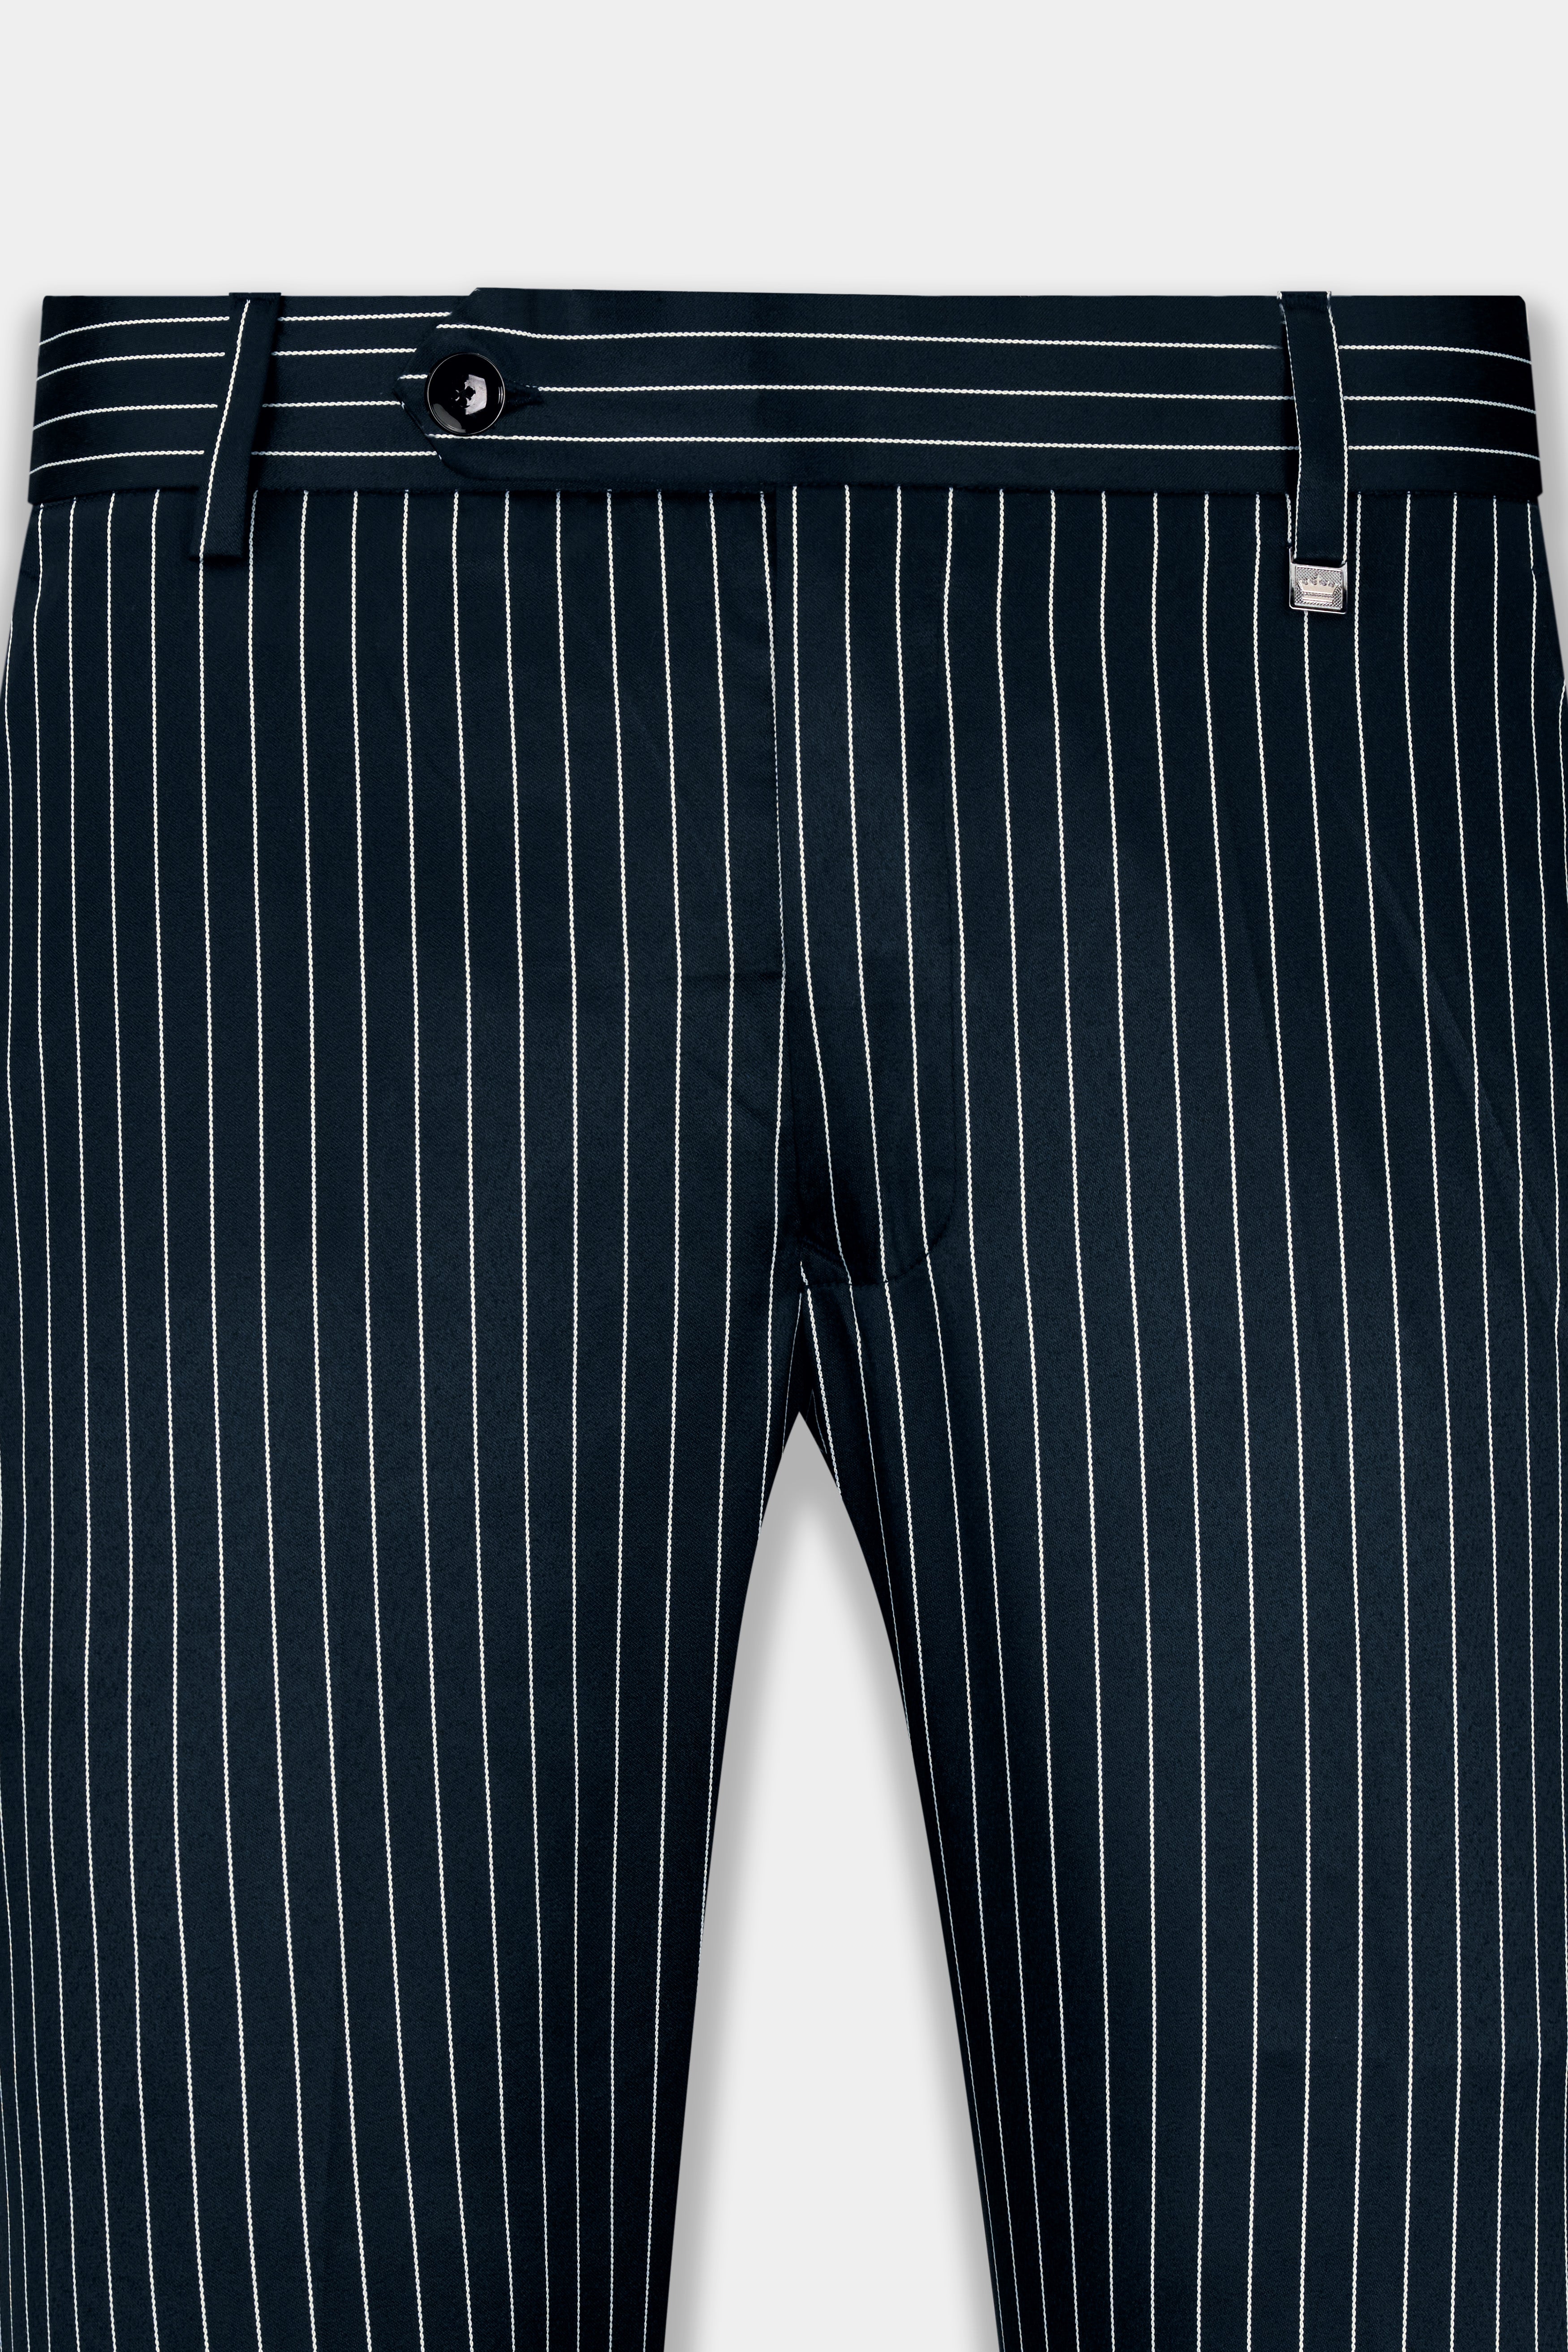 Gunmetal Blue with White Striped Wool Rich Pant T2772-28, T2772-30, T2772-32, T2772-34, T2772-36, T2772-38, T2772-40, T2772-42, T2772-44